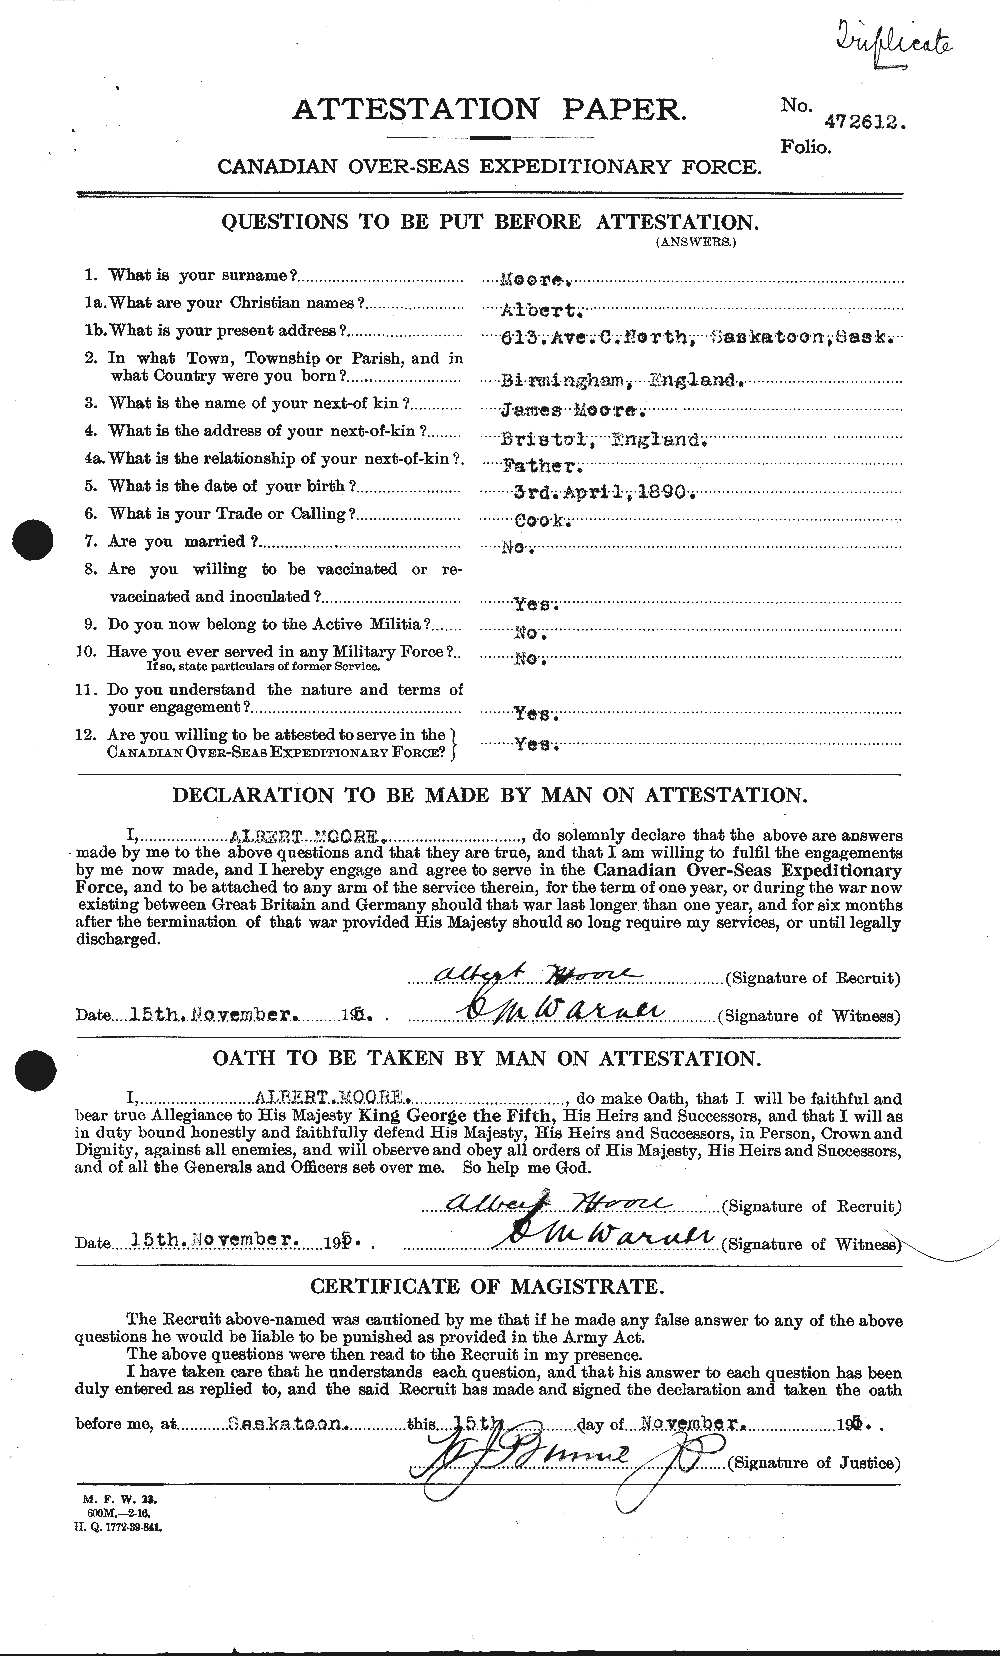 Personnel Records of the First World War - CEF 503216a